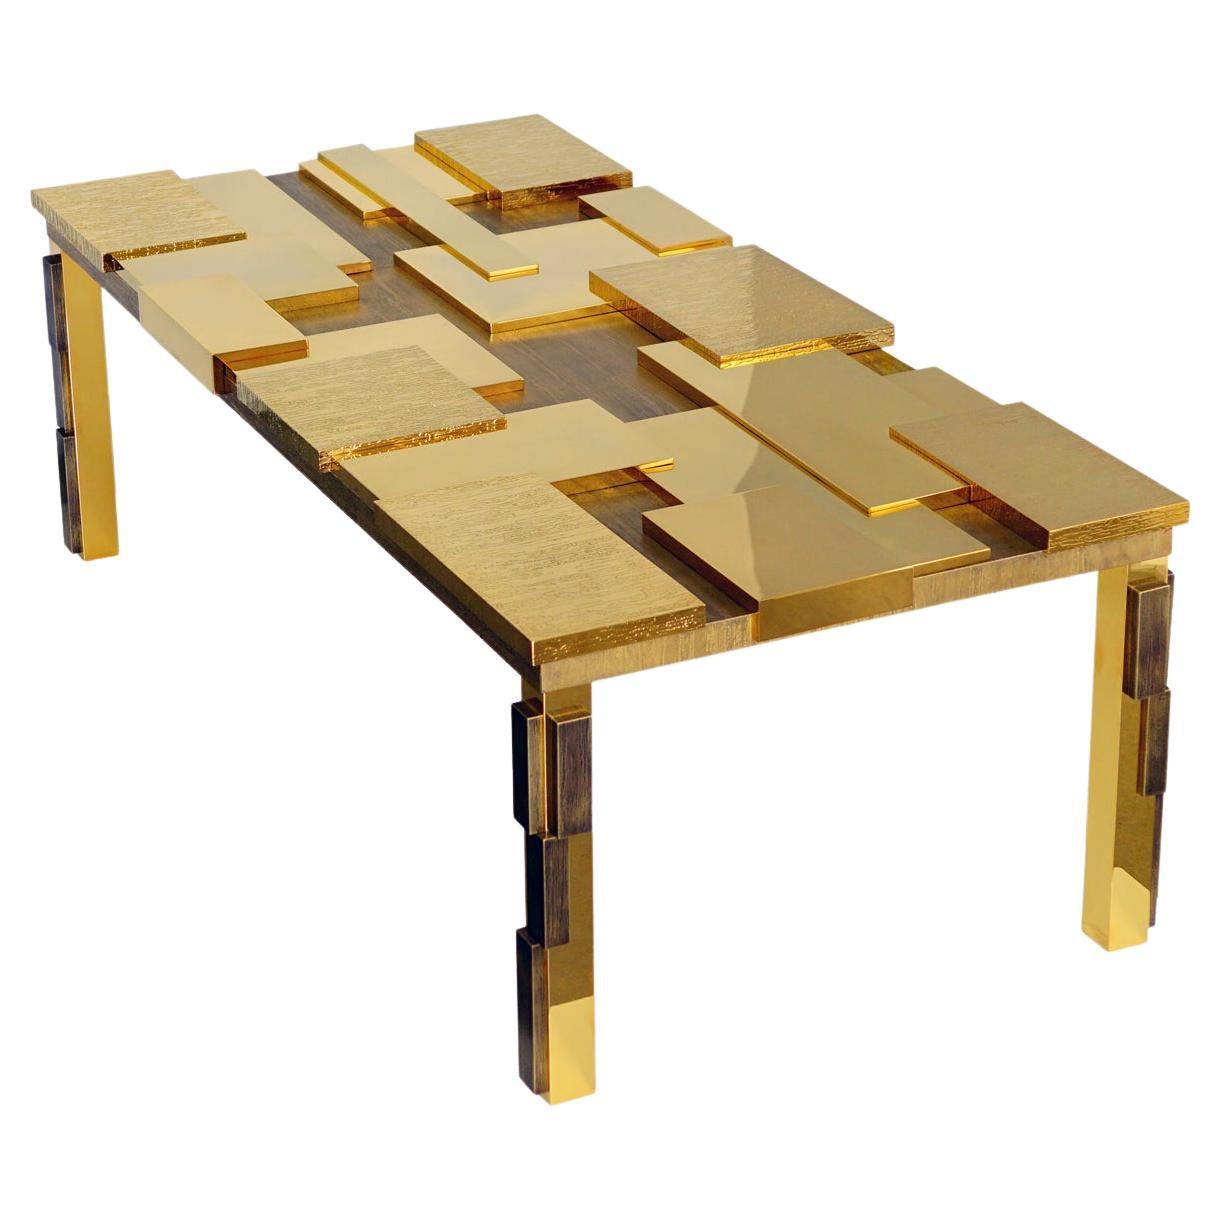 Garrido Cuspid Rectangular Coffee Table in 24K Yellow Gold and Bronze Finish For Sale